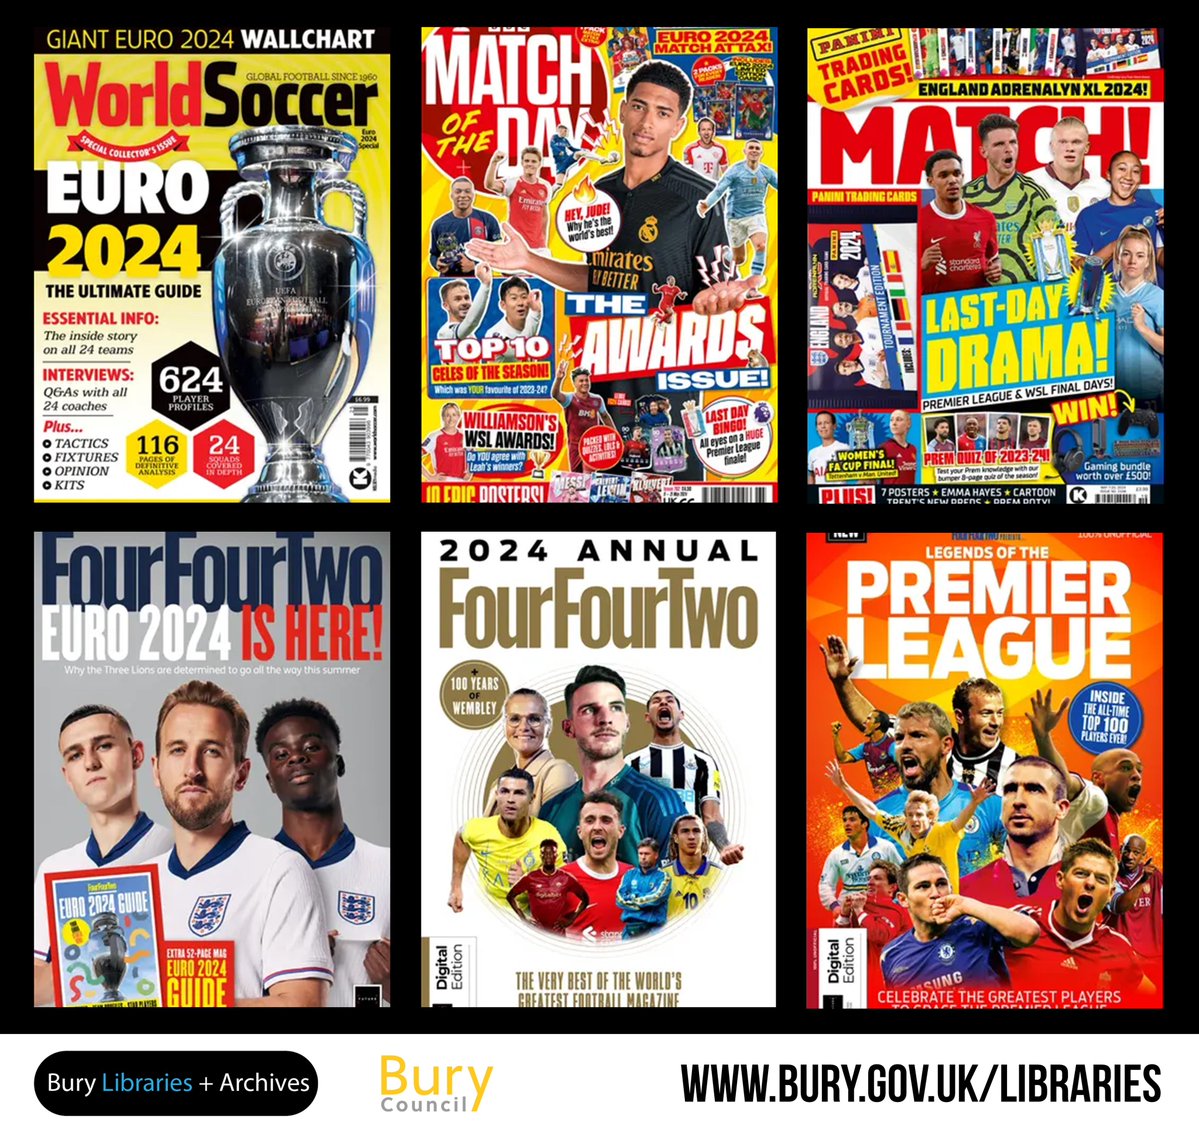 The FA Cup Final and the Women’s Champions League Final are on this Saturday! Read about all the build-up through these brilliant football magazines on @BorrowBox. Just download the app, sign in with your library details and get browsing: bit.ly/BuryBorrowBox. 🎧 📱 ⚽️